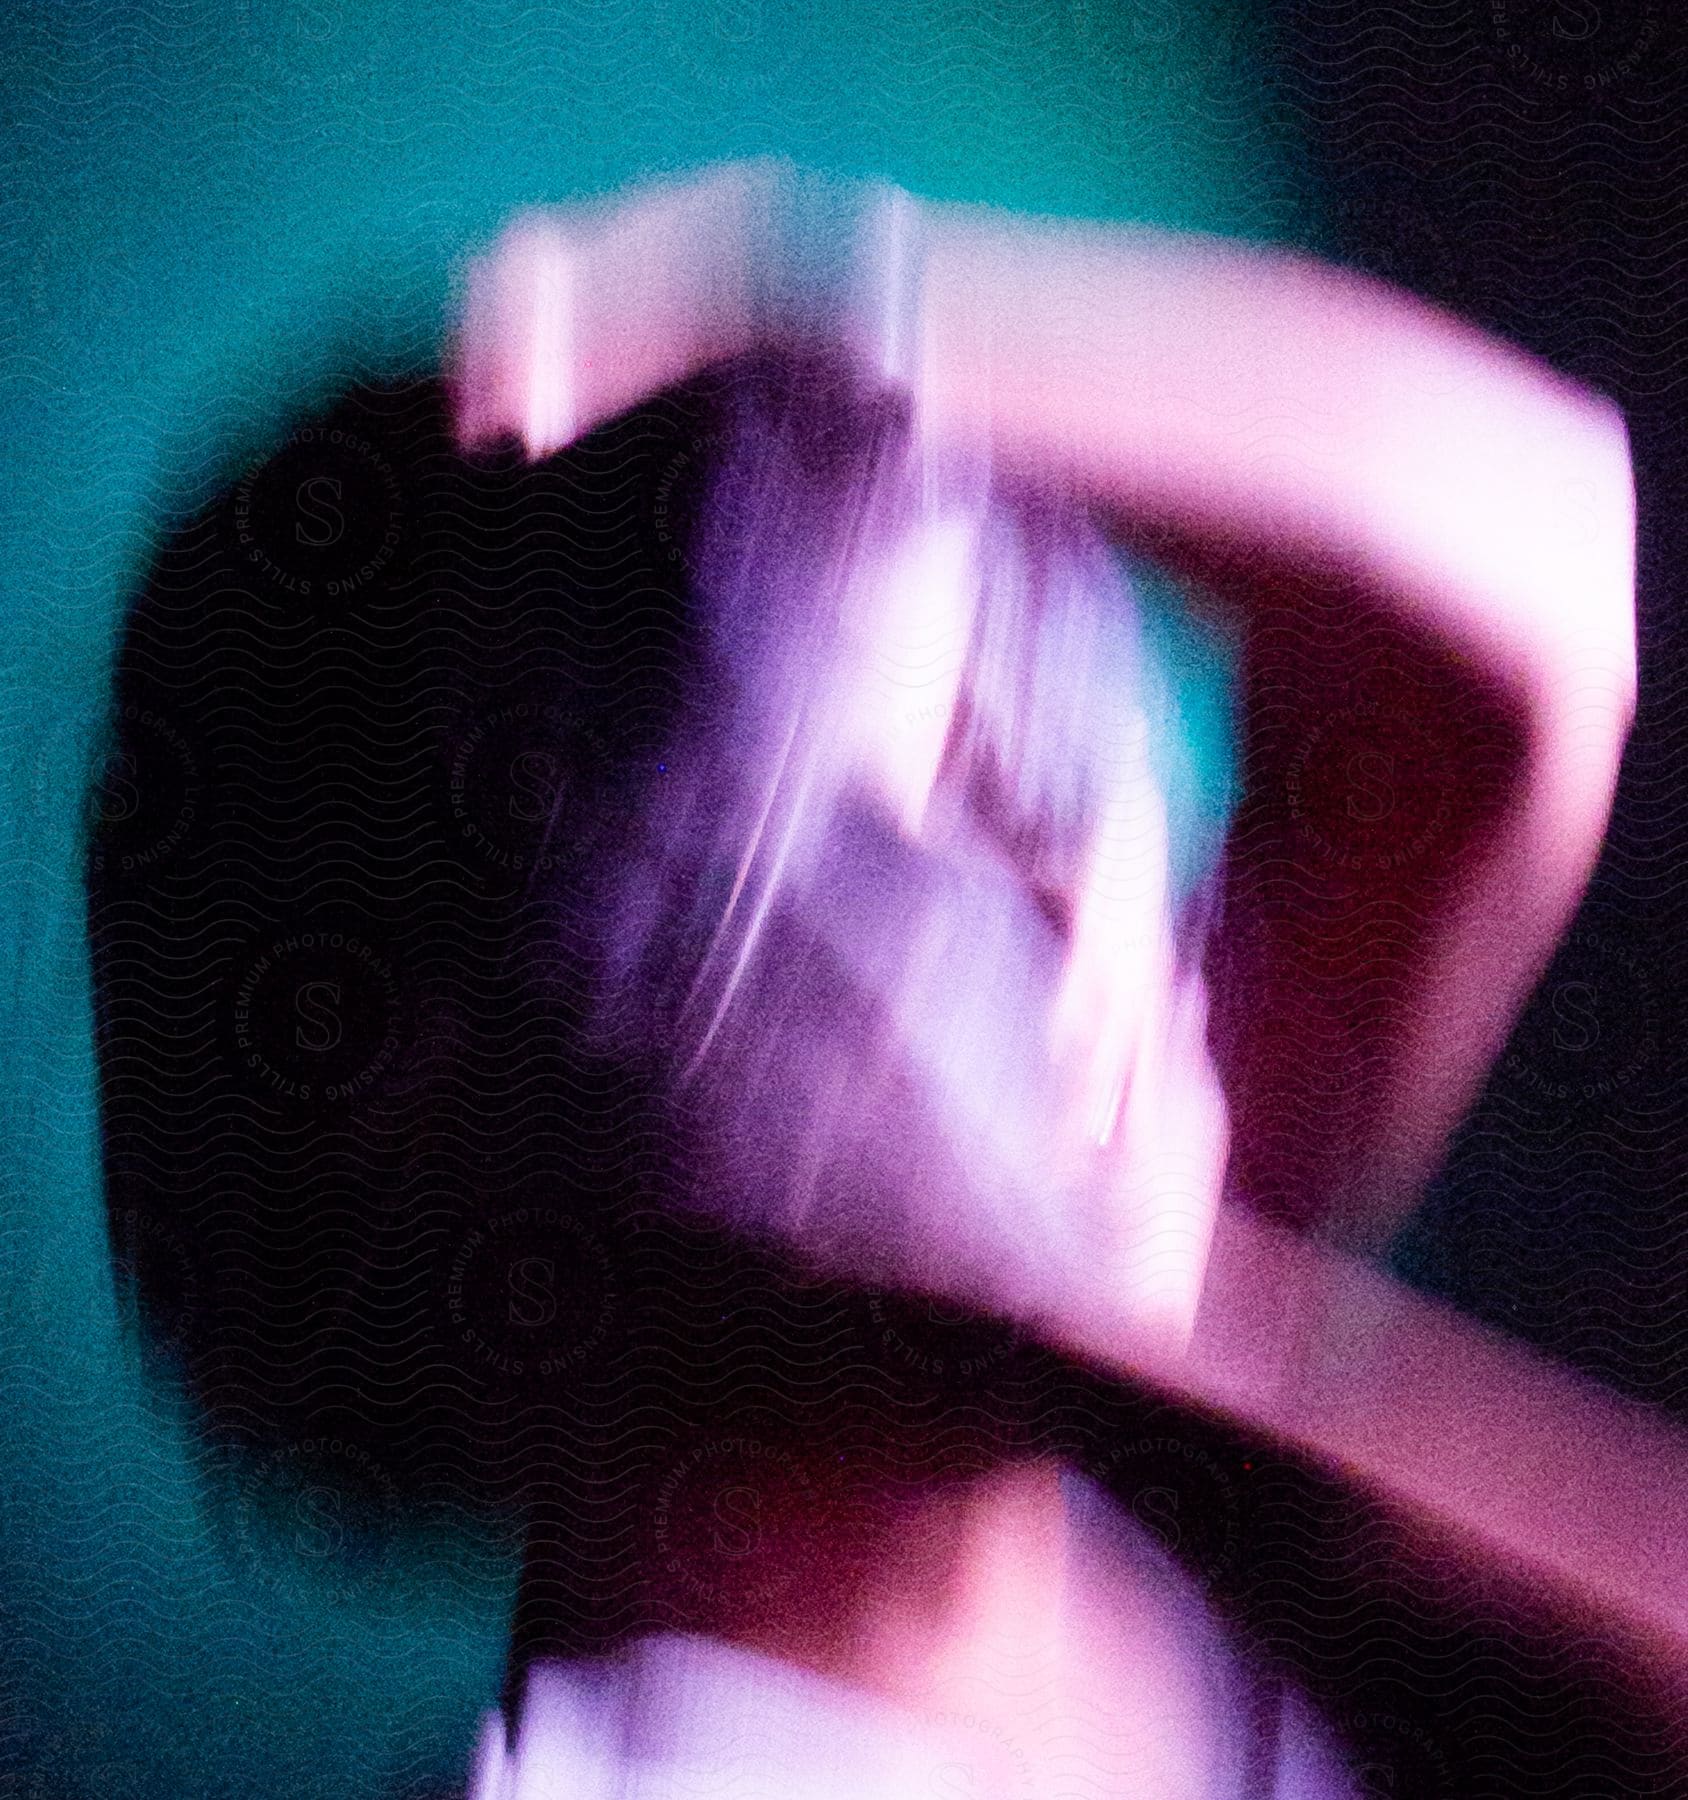 A person posing indoors with their hands and gesture distorted by motion blur